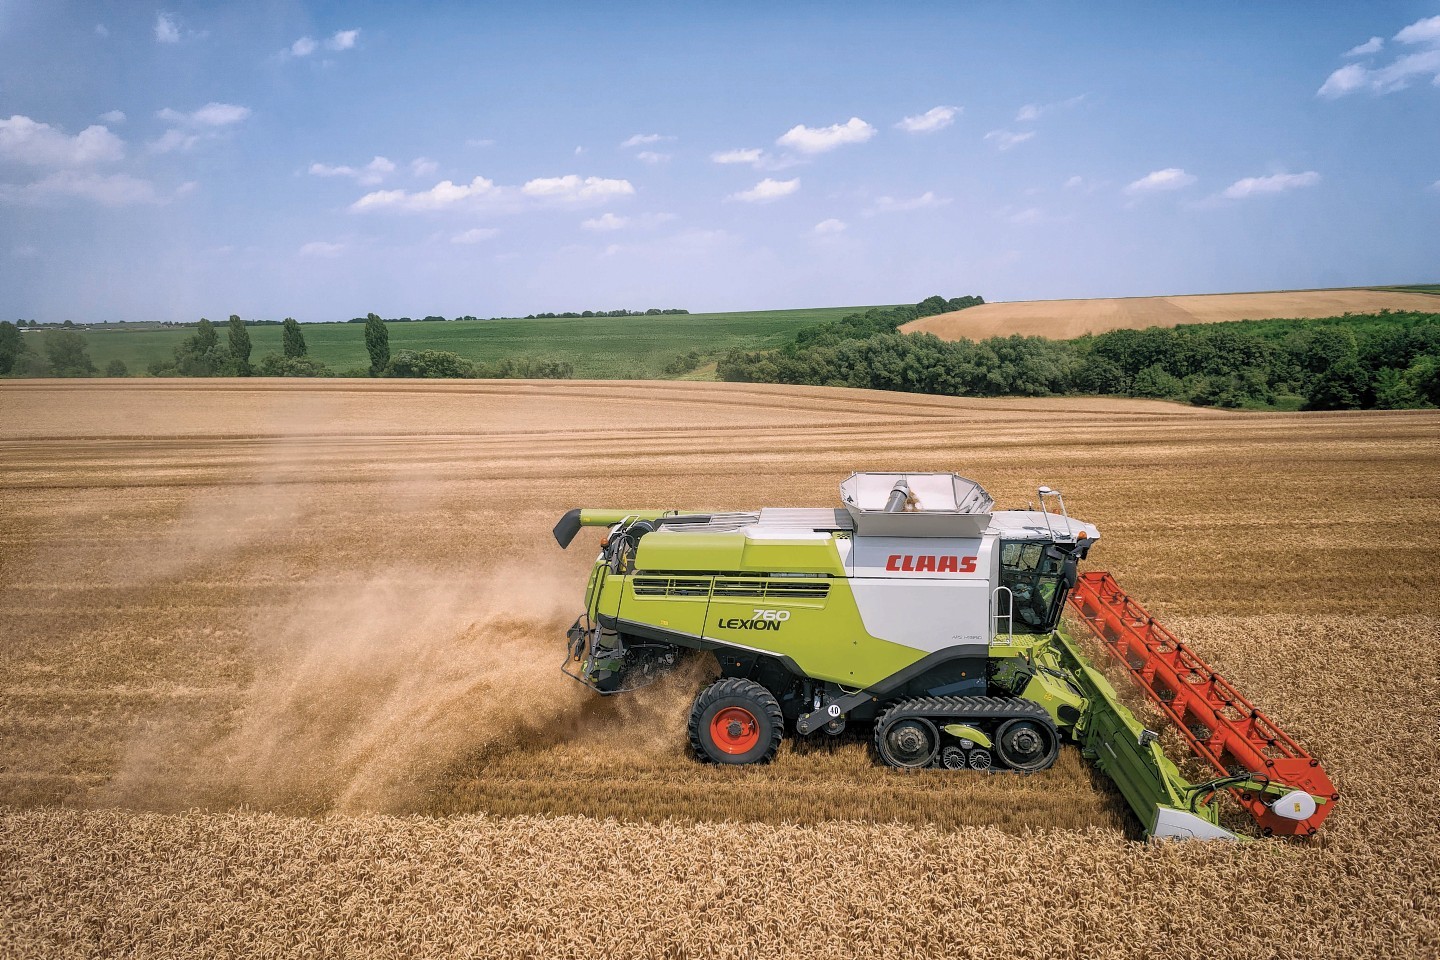 The Claas Lexion 700 in action